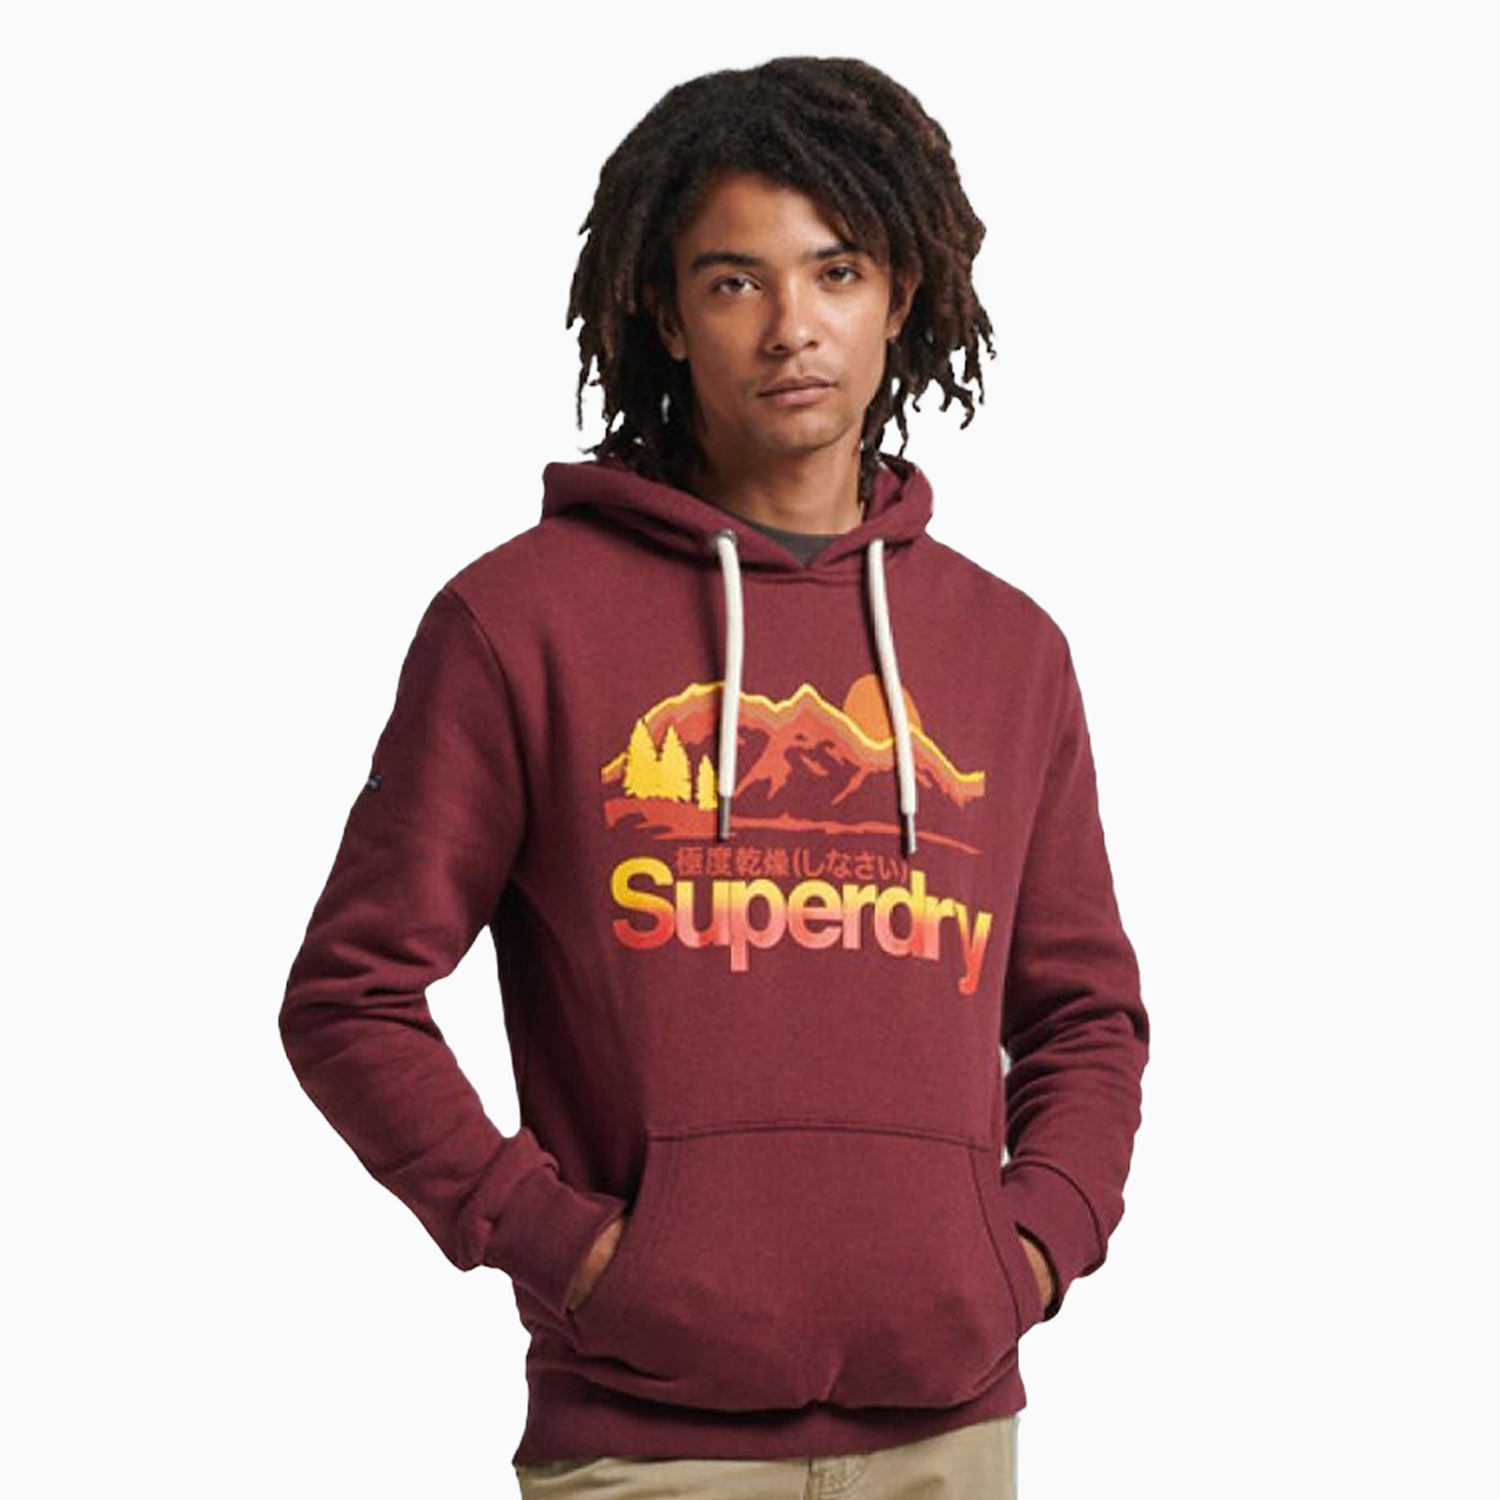 Superdry Men's Vintage Cl Great Outdoors Hoodie - Color: Deepest - Tops and Bottoms USA -